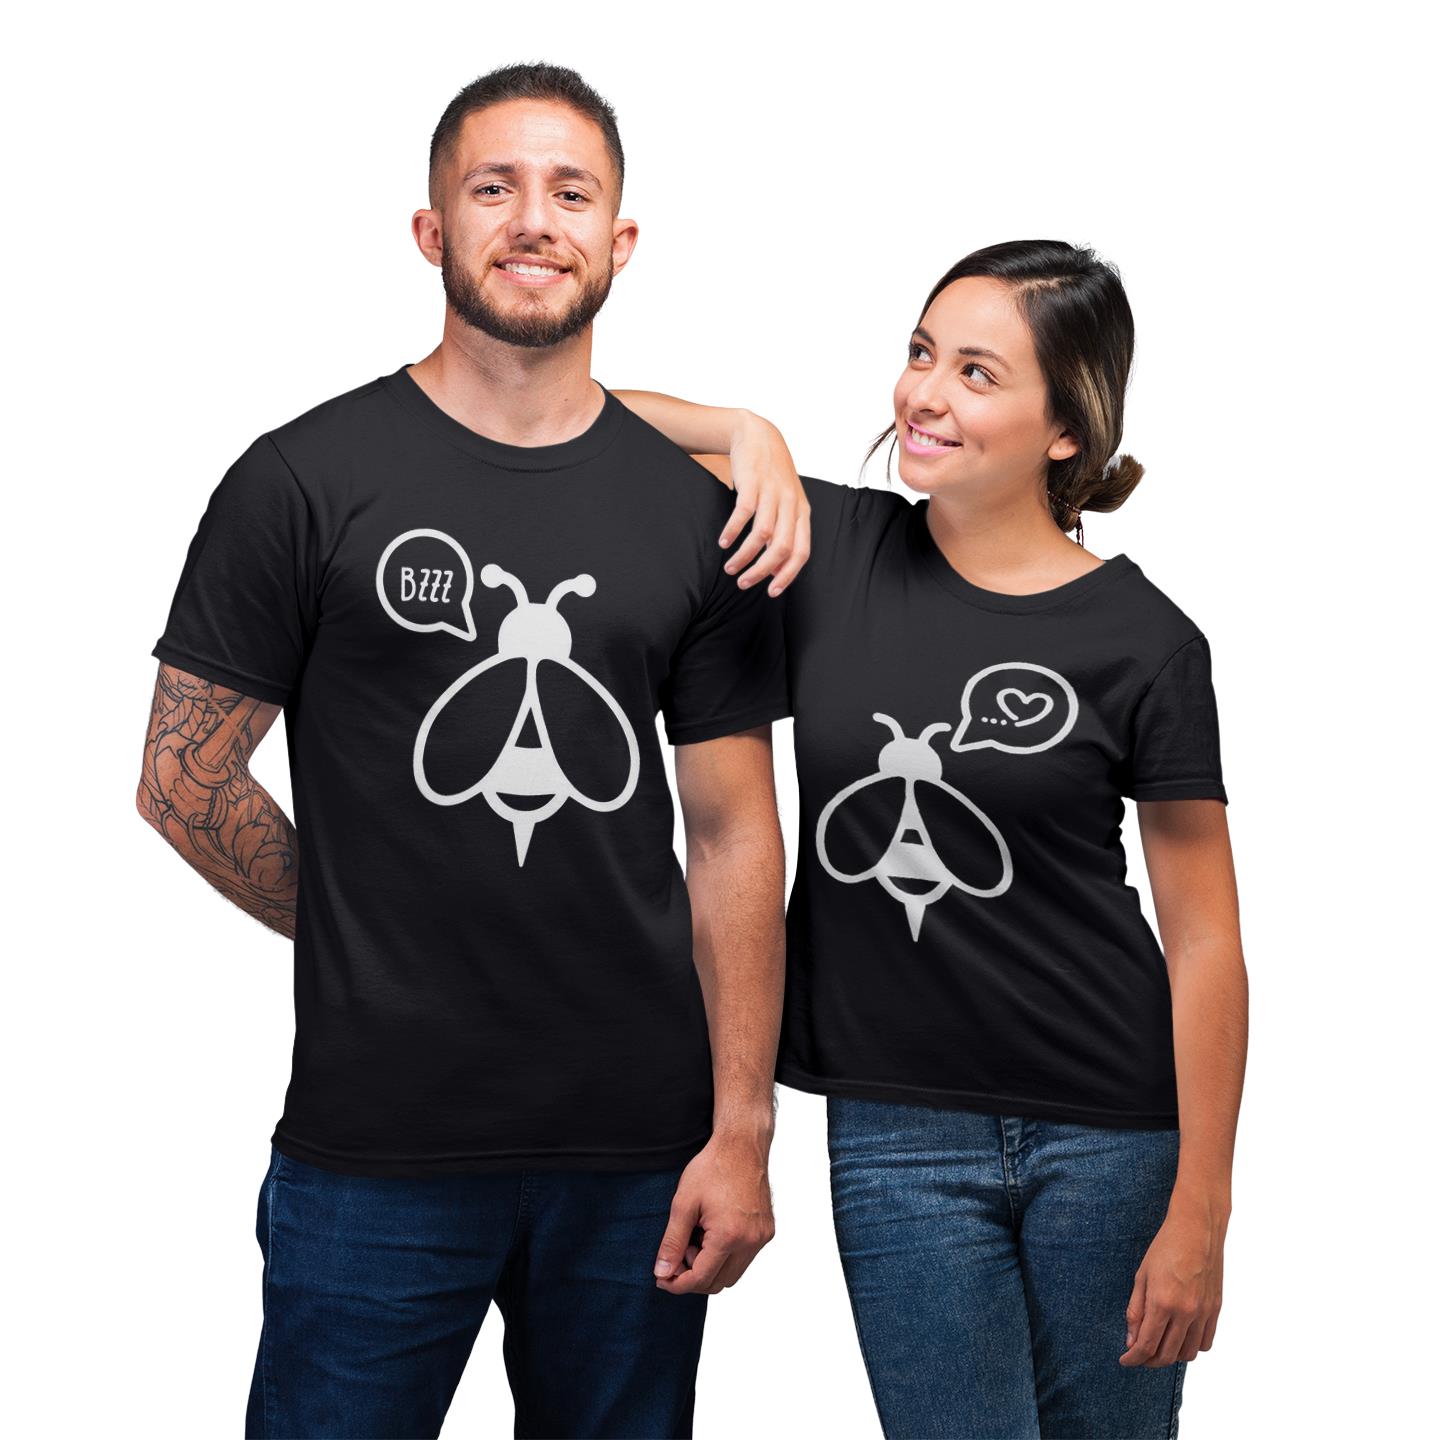 Bzzz Loving Bee Funny Shirt For Couple Lover Matching T-shirt